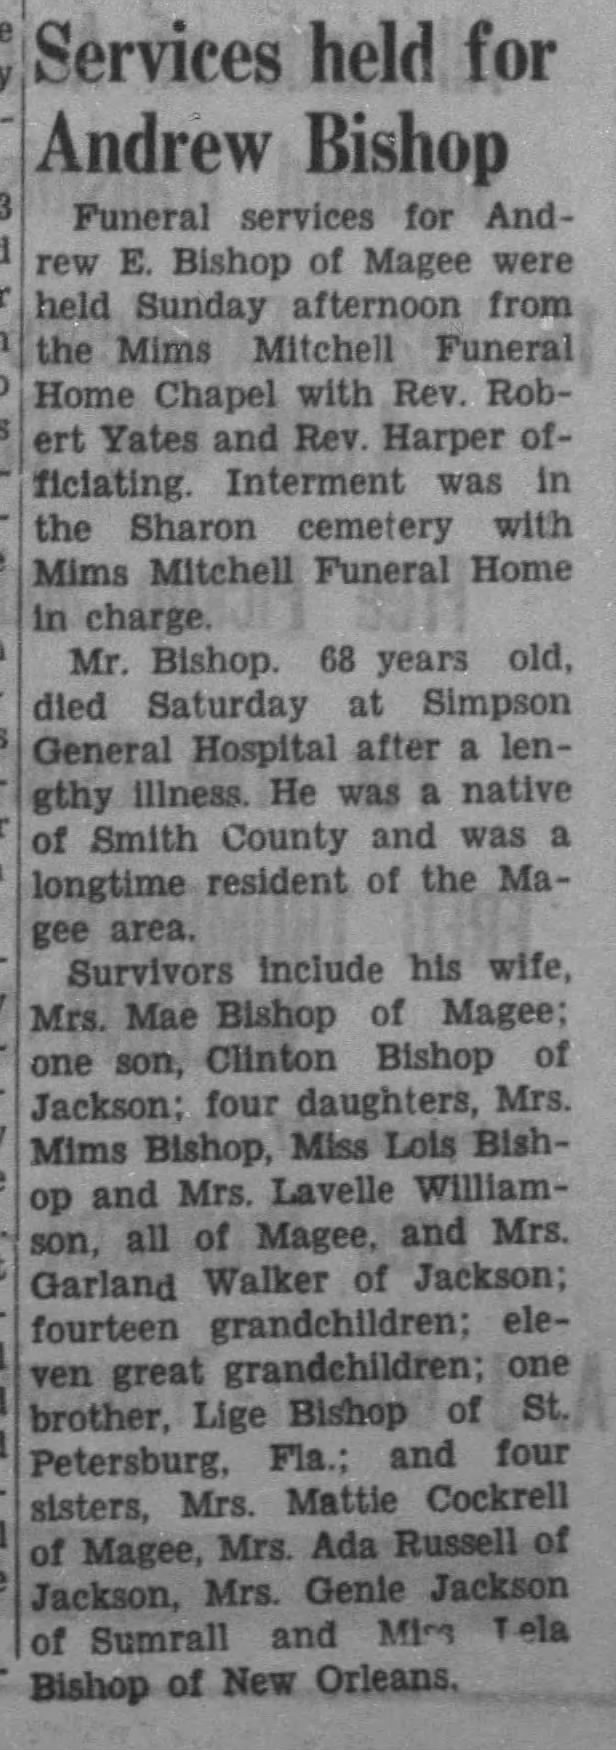 Obituary for Andrew E. Bishop